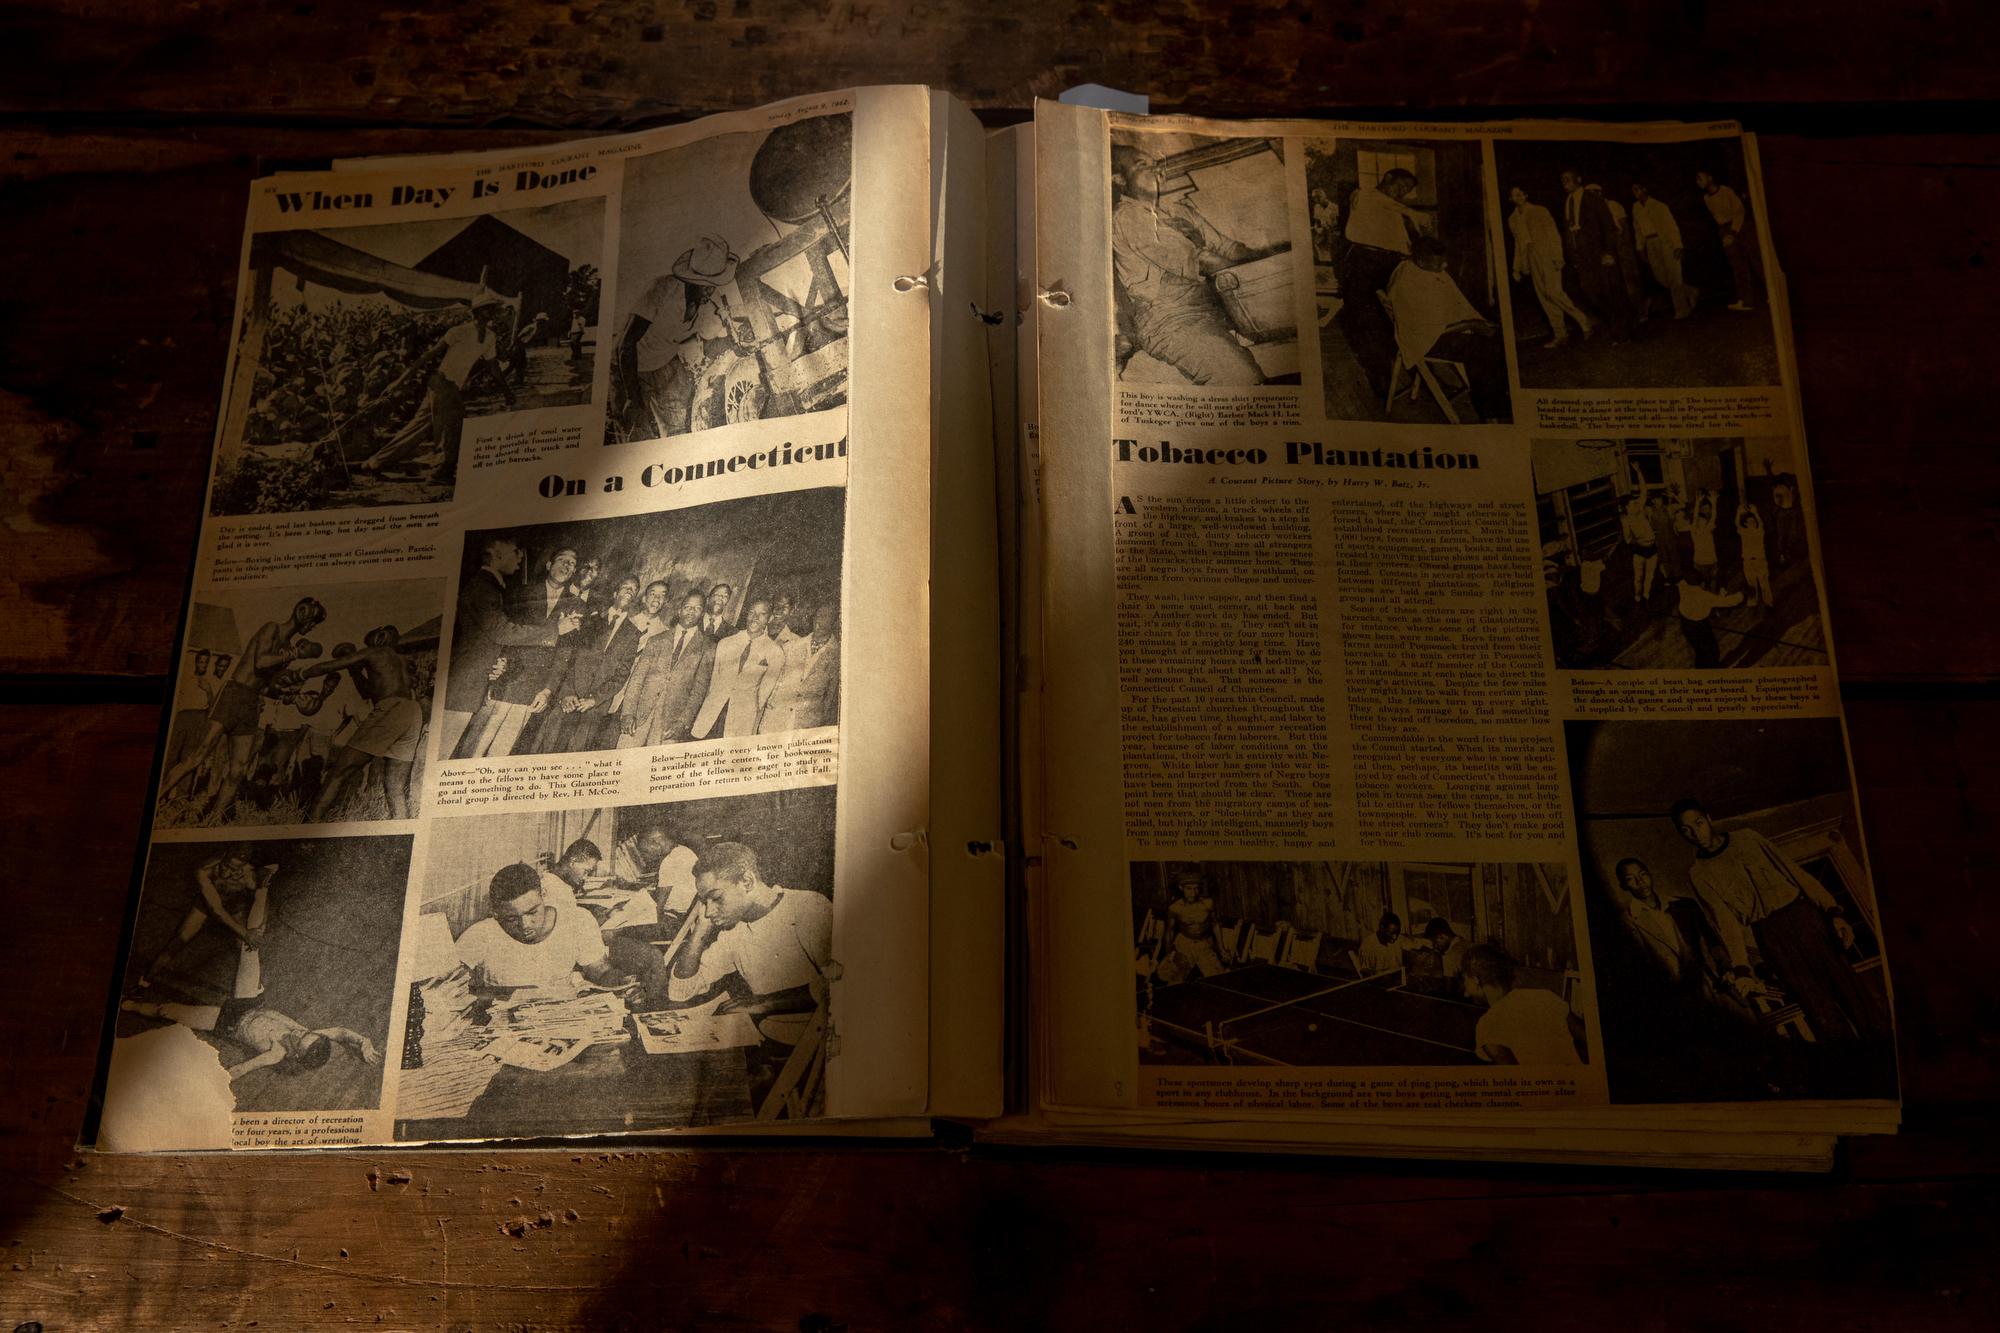 Recent Assignment - The Hartford Courant Magazine published in 1942 showed...